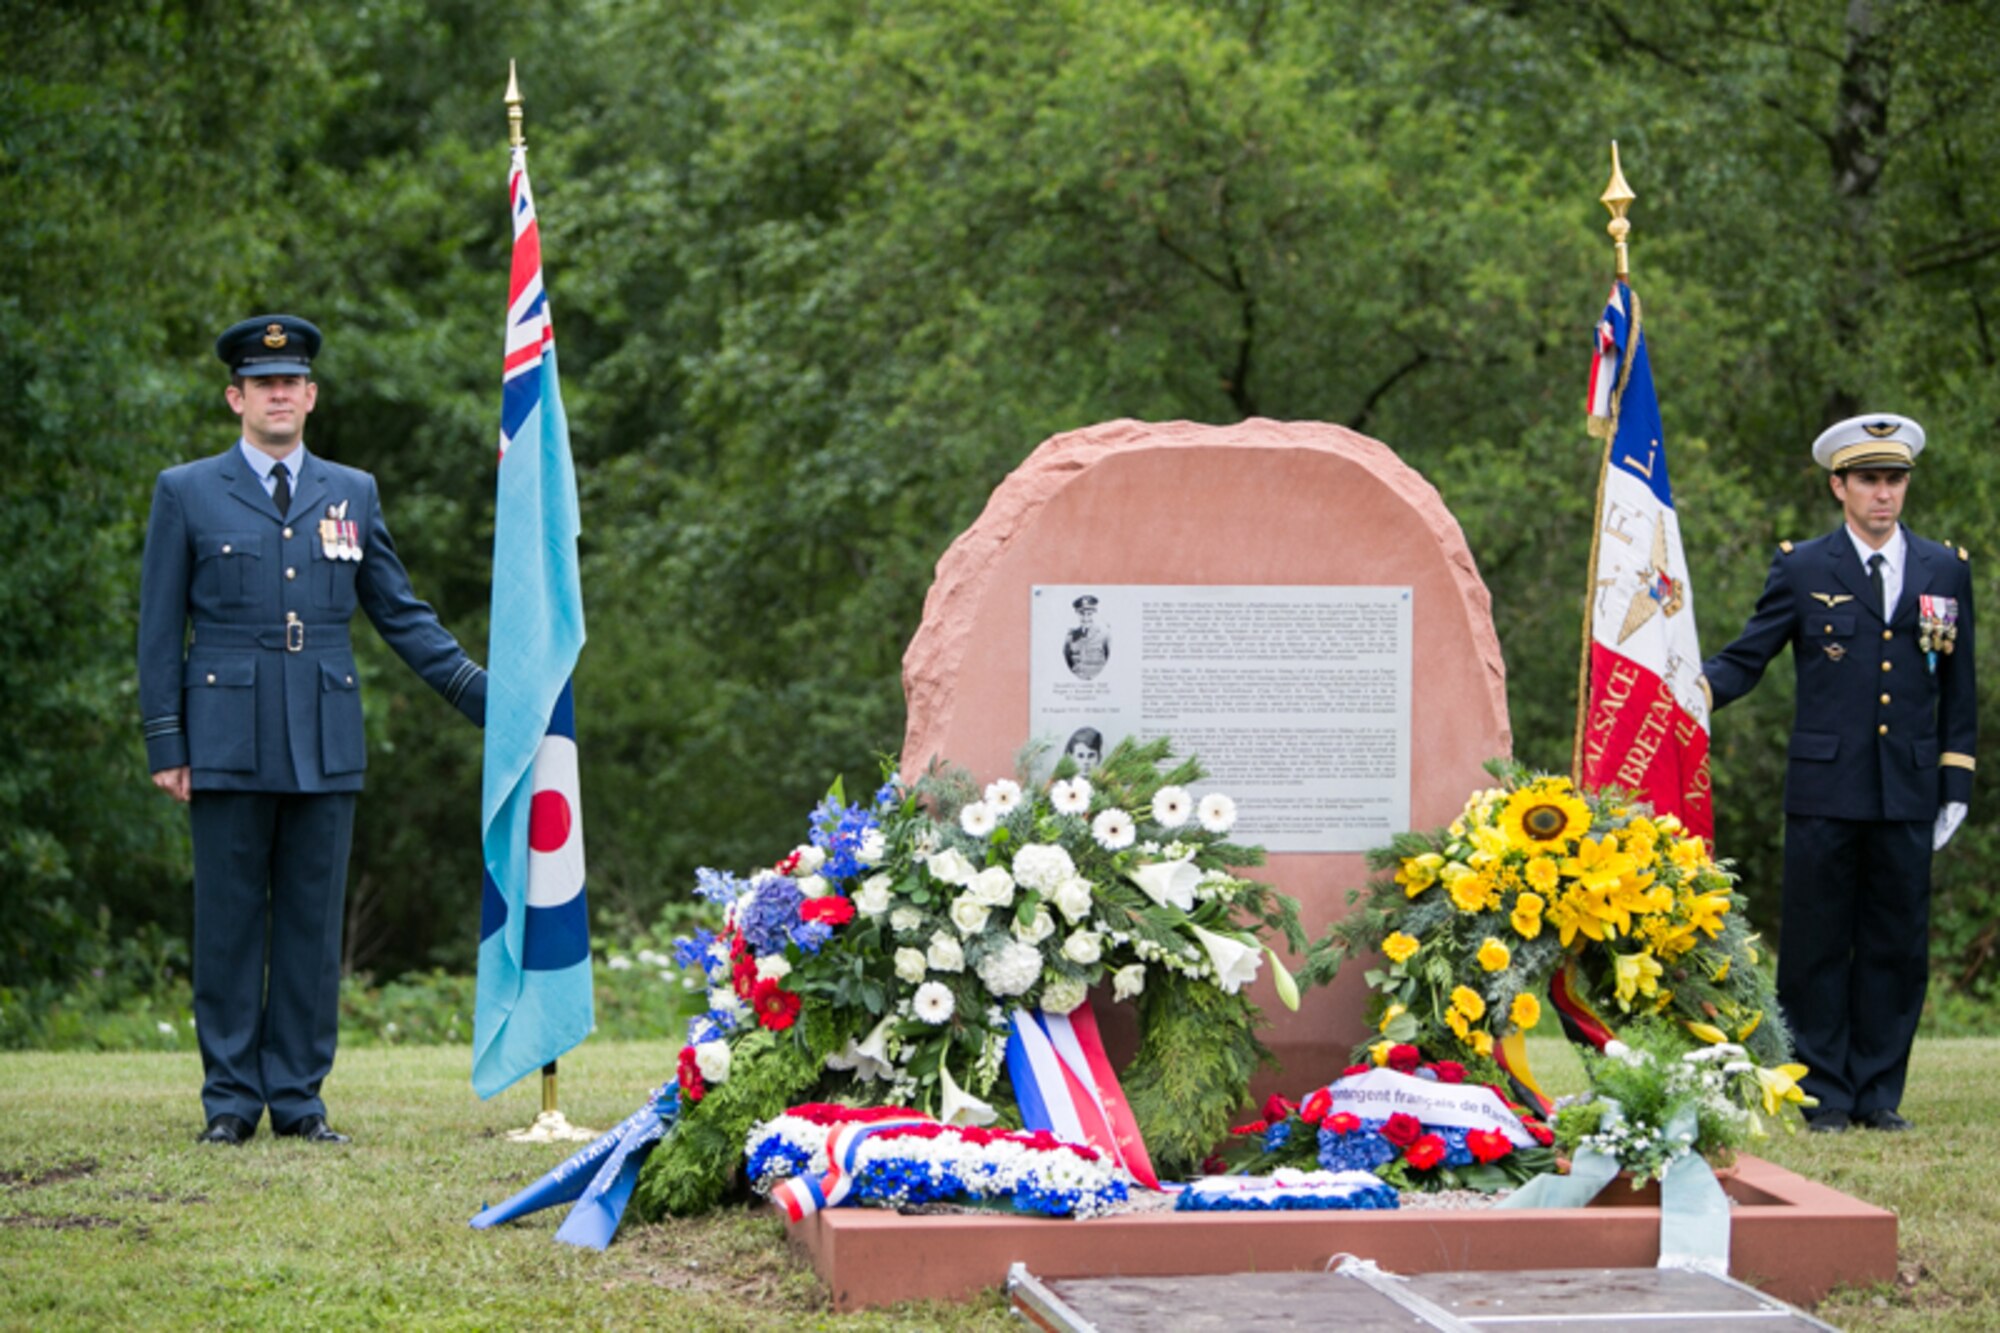 Royal Air Force and French Air Force Honor Guards stand next to a monument dedicated to the memory of RAF Squadron leader Roger Bushell and FAF 2nd Lt. Bernad Scheidhauer, July 1, 2017.  Both men were part of the “Great Escapees,” who were executed by the Gestapo on March 29, 1944 near present-day Ramstein Air Base. (U.S. Air Force photo by Staff Sgt. Timothy Moore)